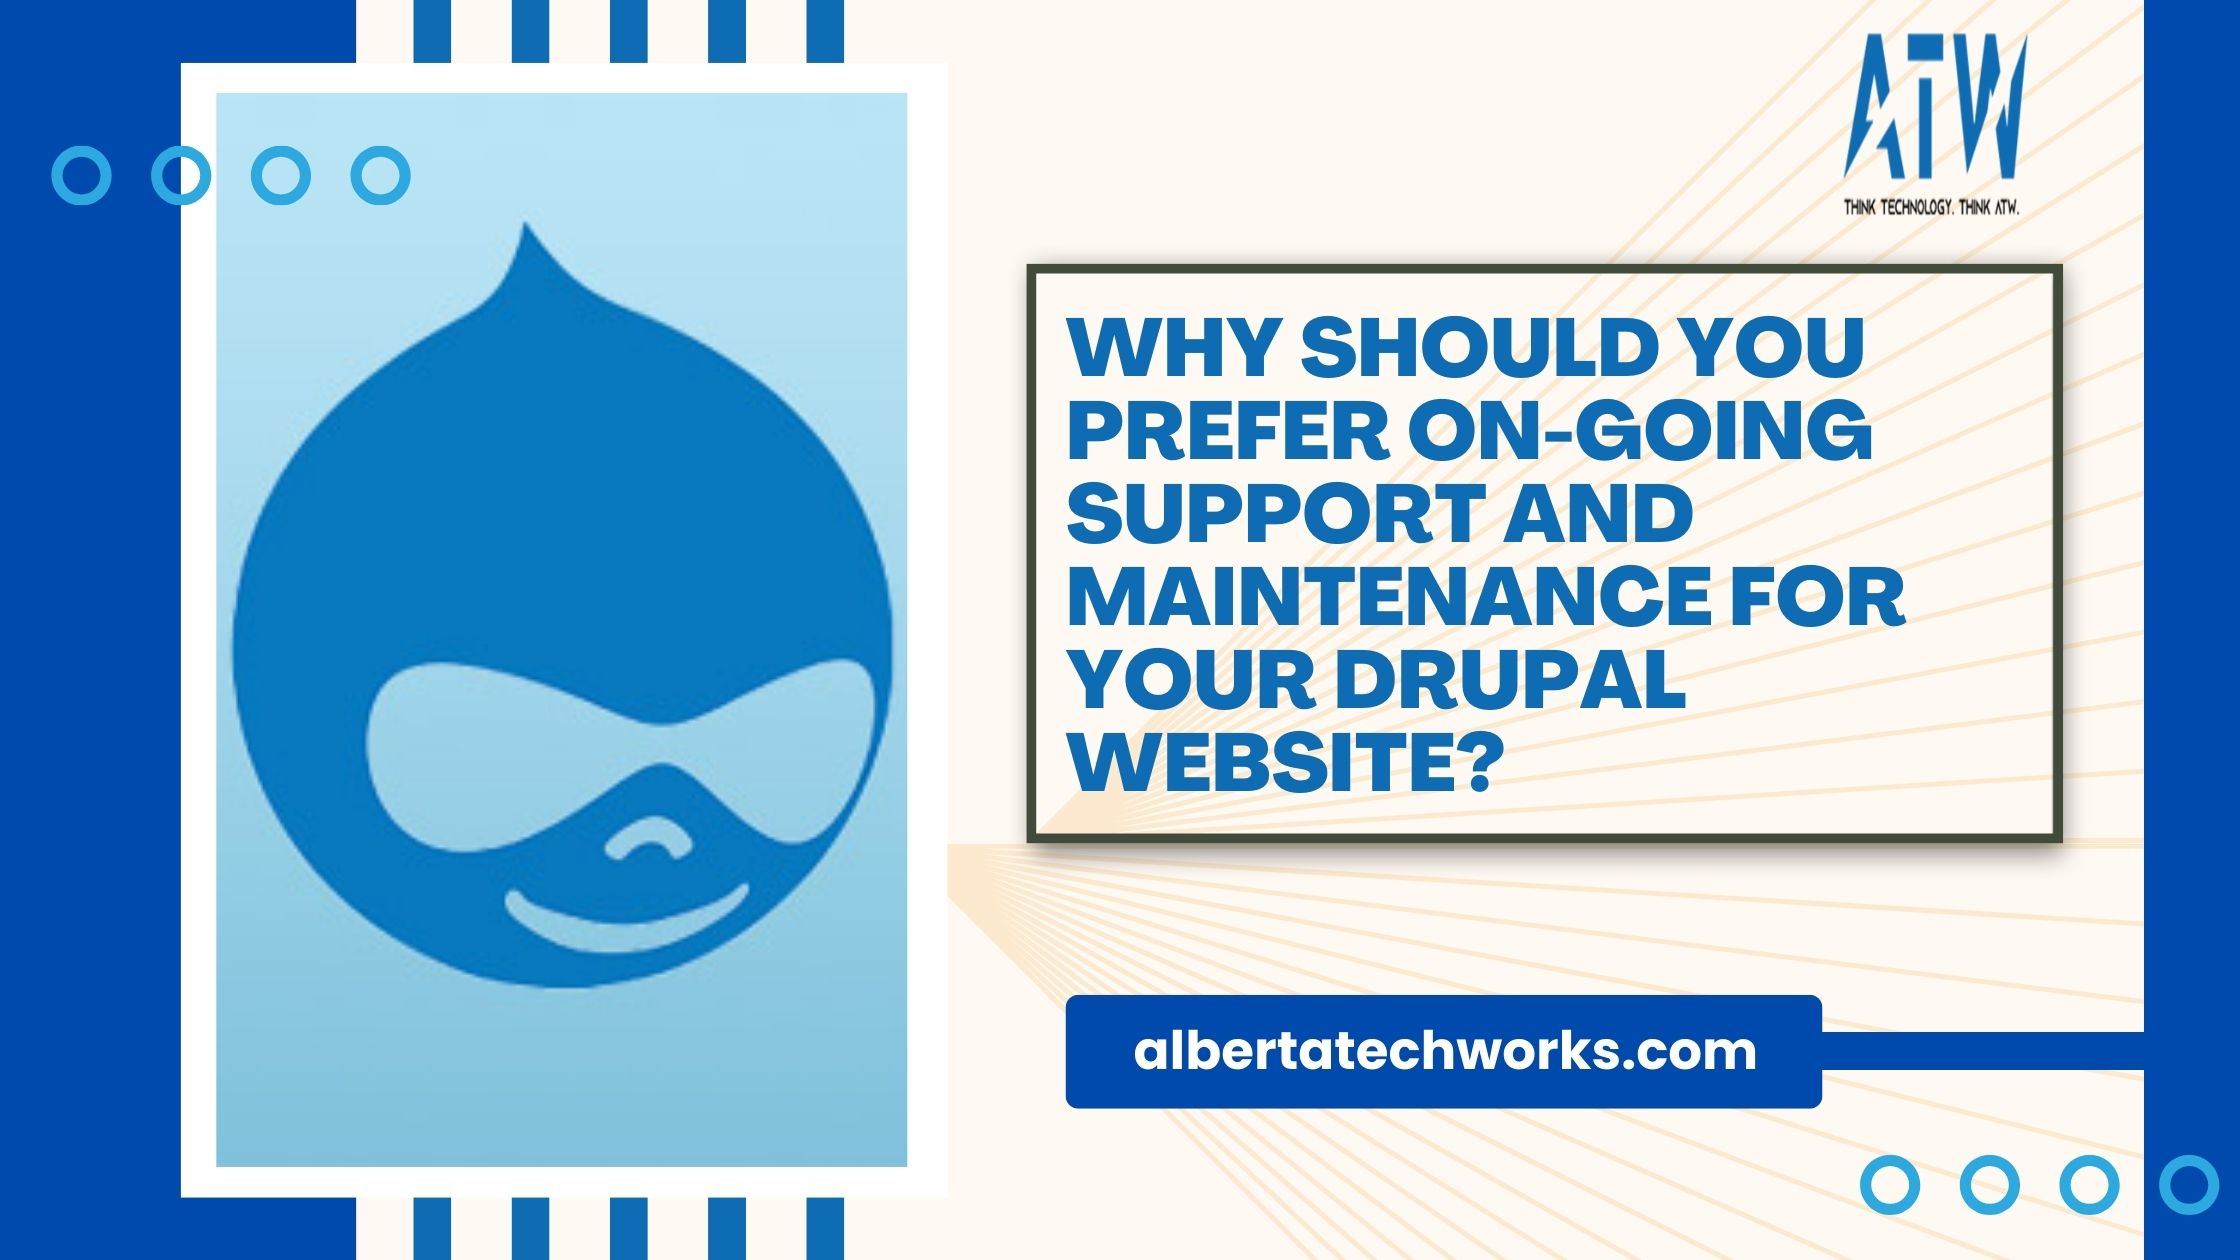 Why Should You Prefer On-Going Support and Maintenance For Your Drupal Website